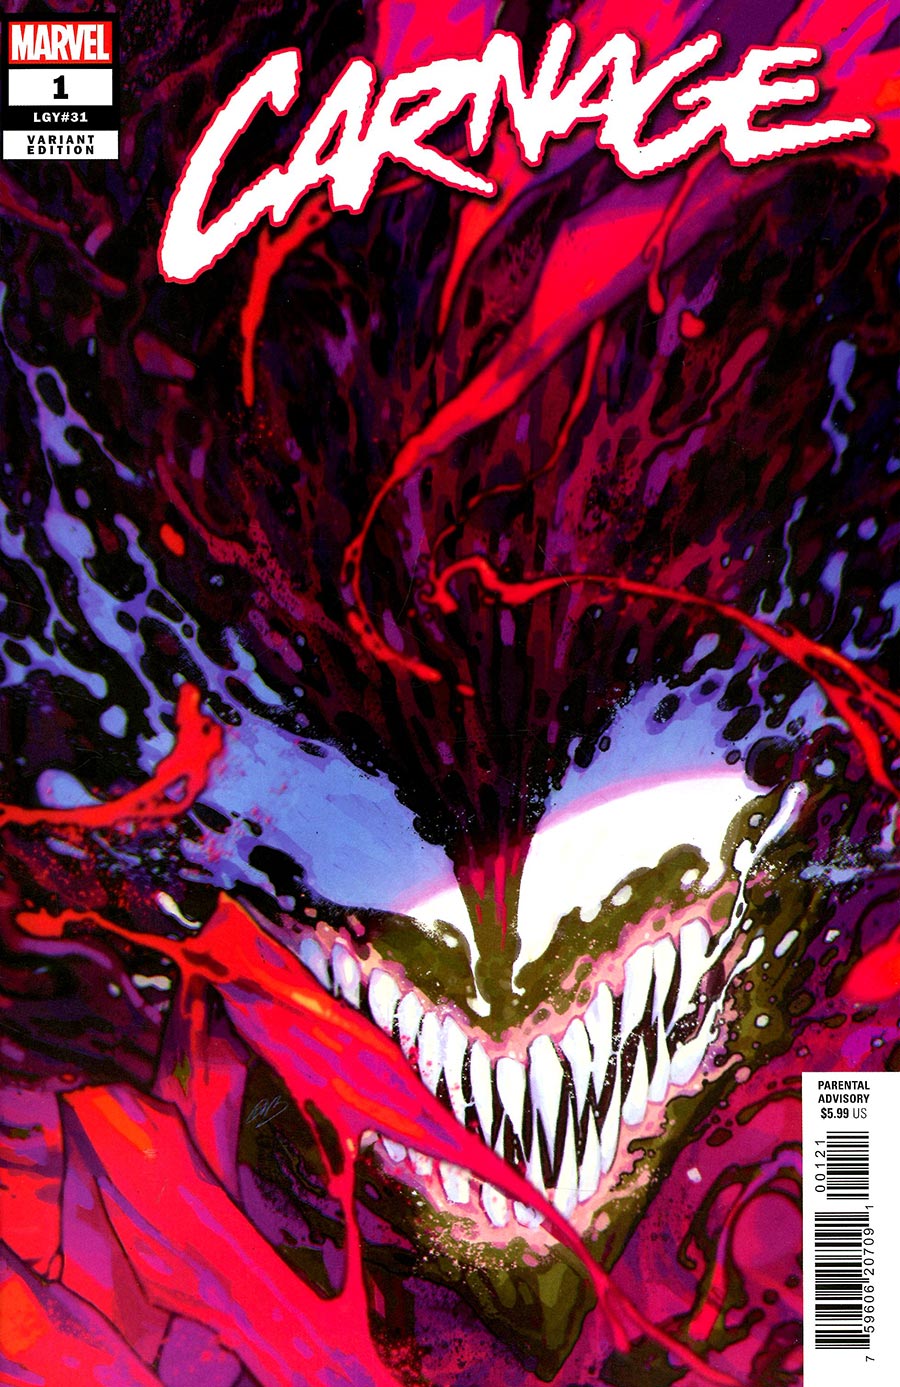 Carnage Vol 4 #1 Cover C Variant Rose Besch Cover